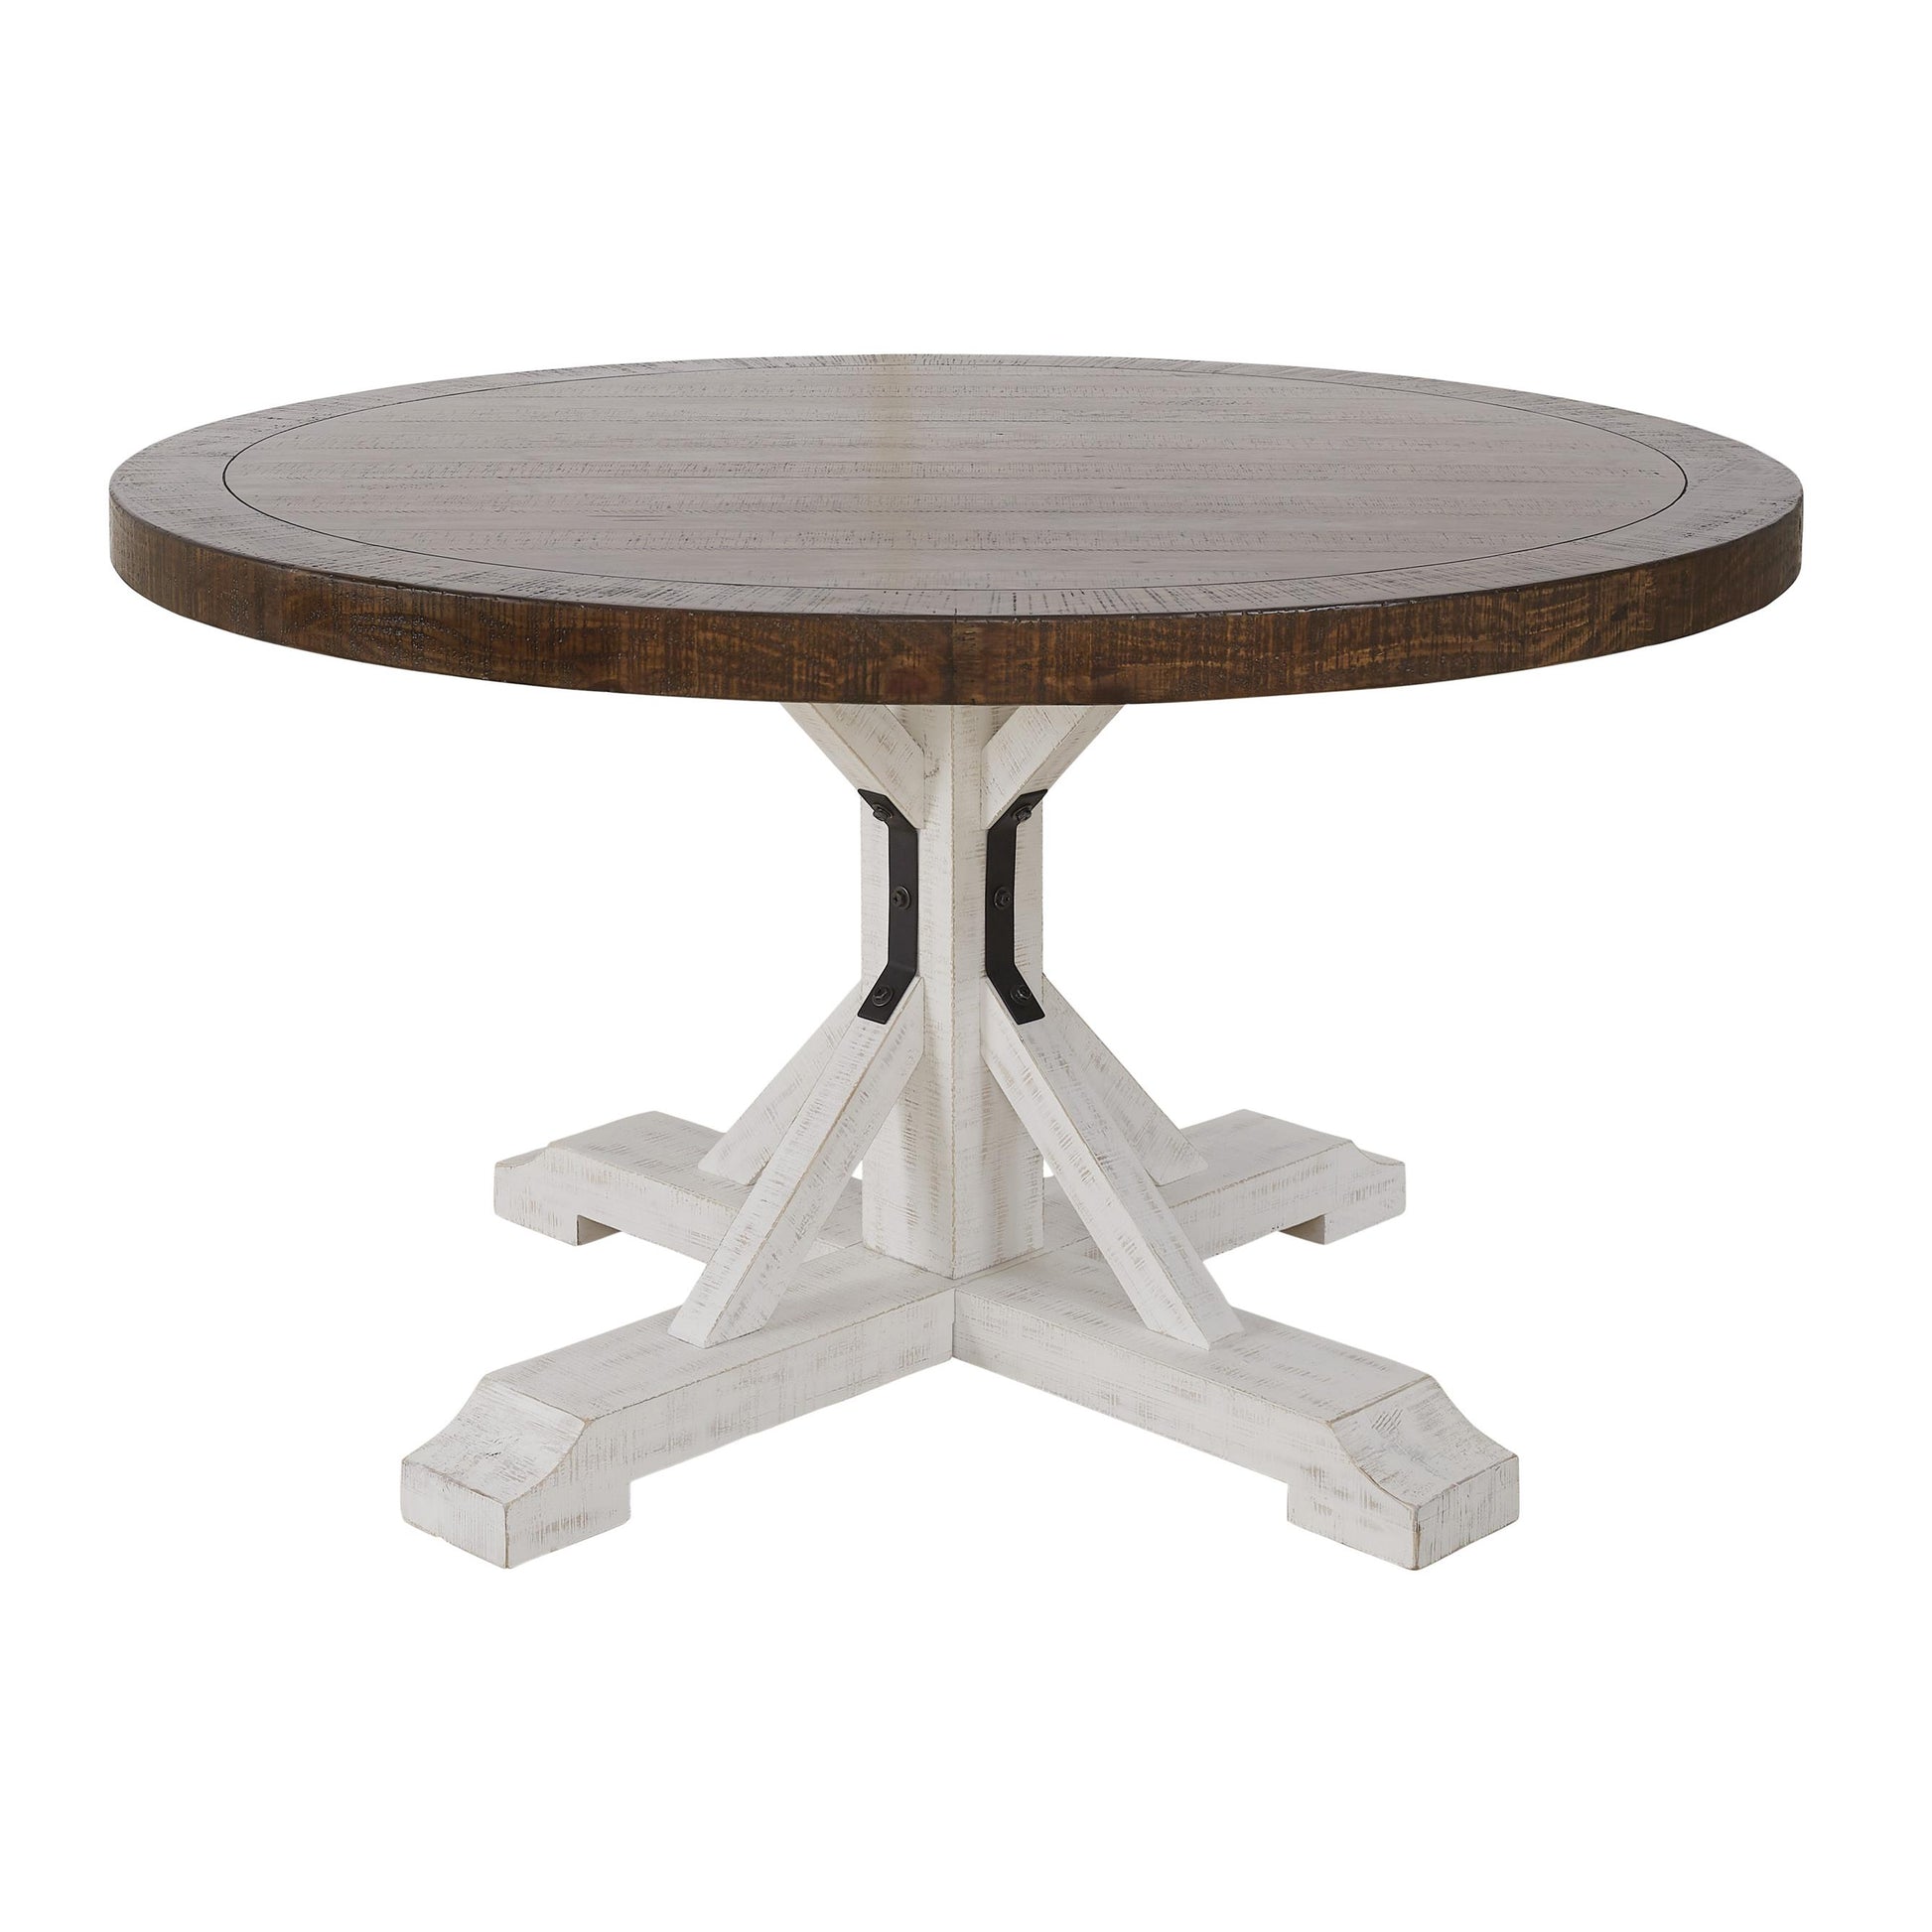 Signature Design by Ashley Round Valebeck Dining Table with Pedestal Base D546-50T/D546-50B